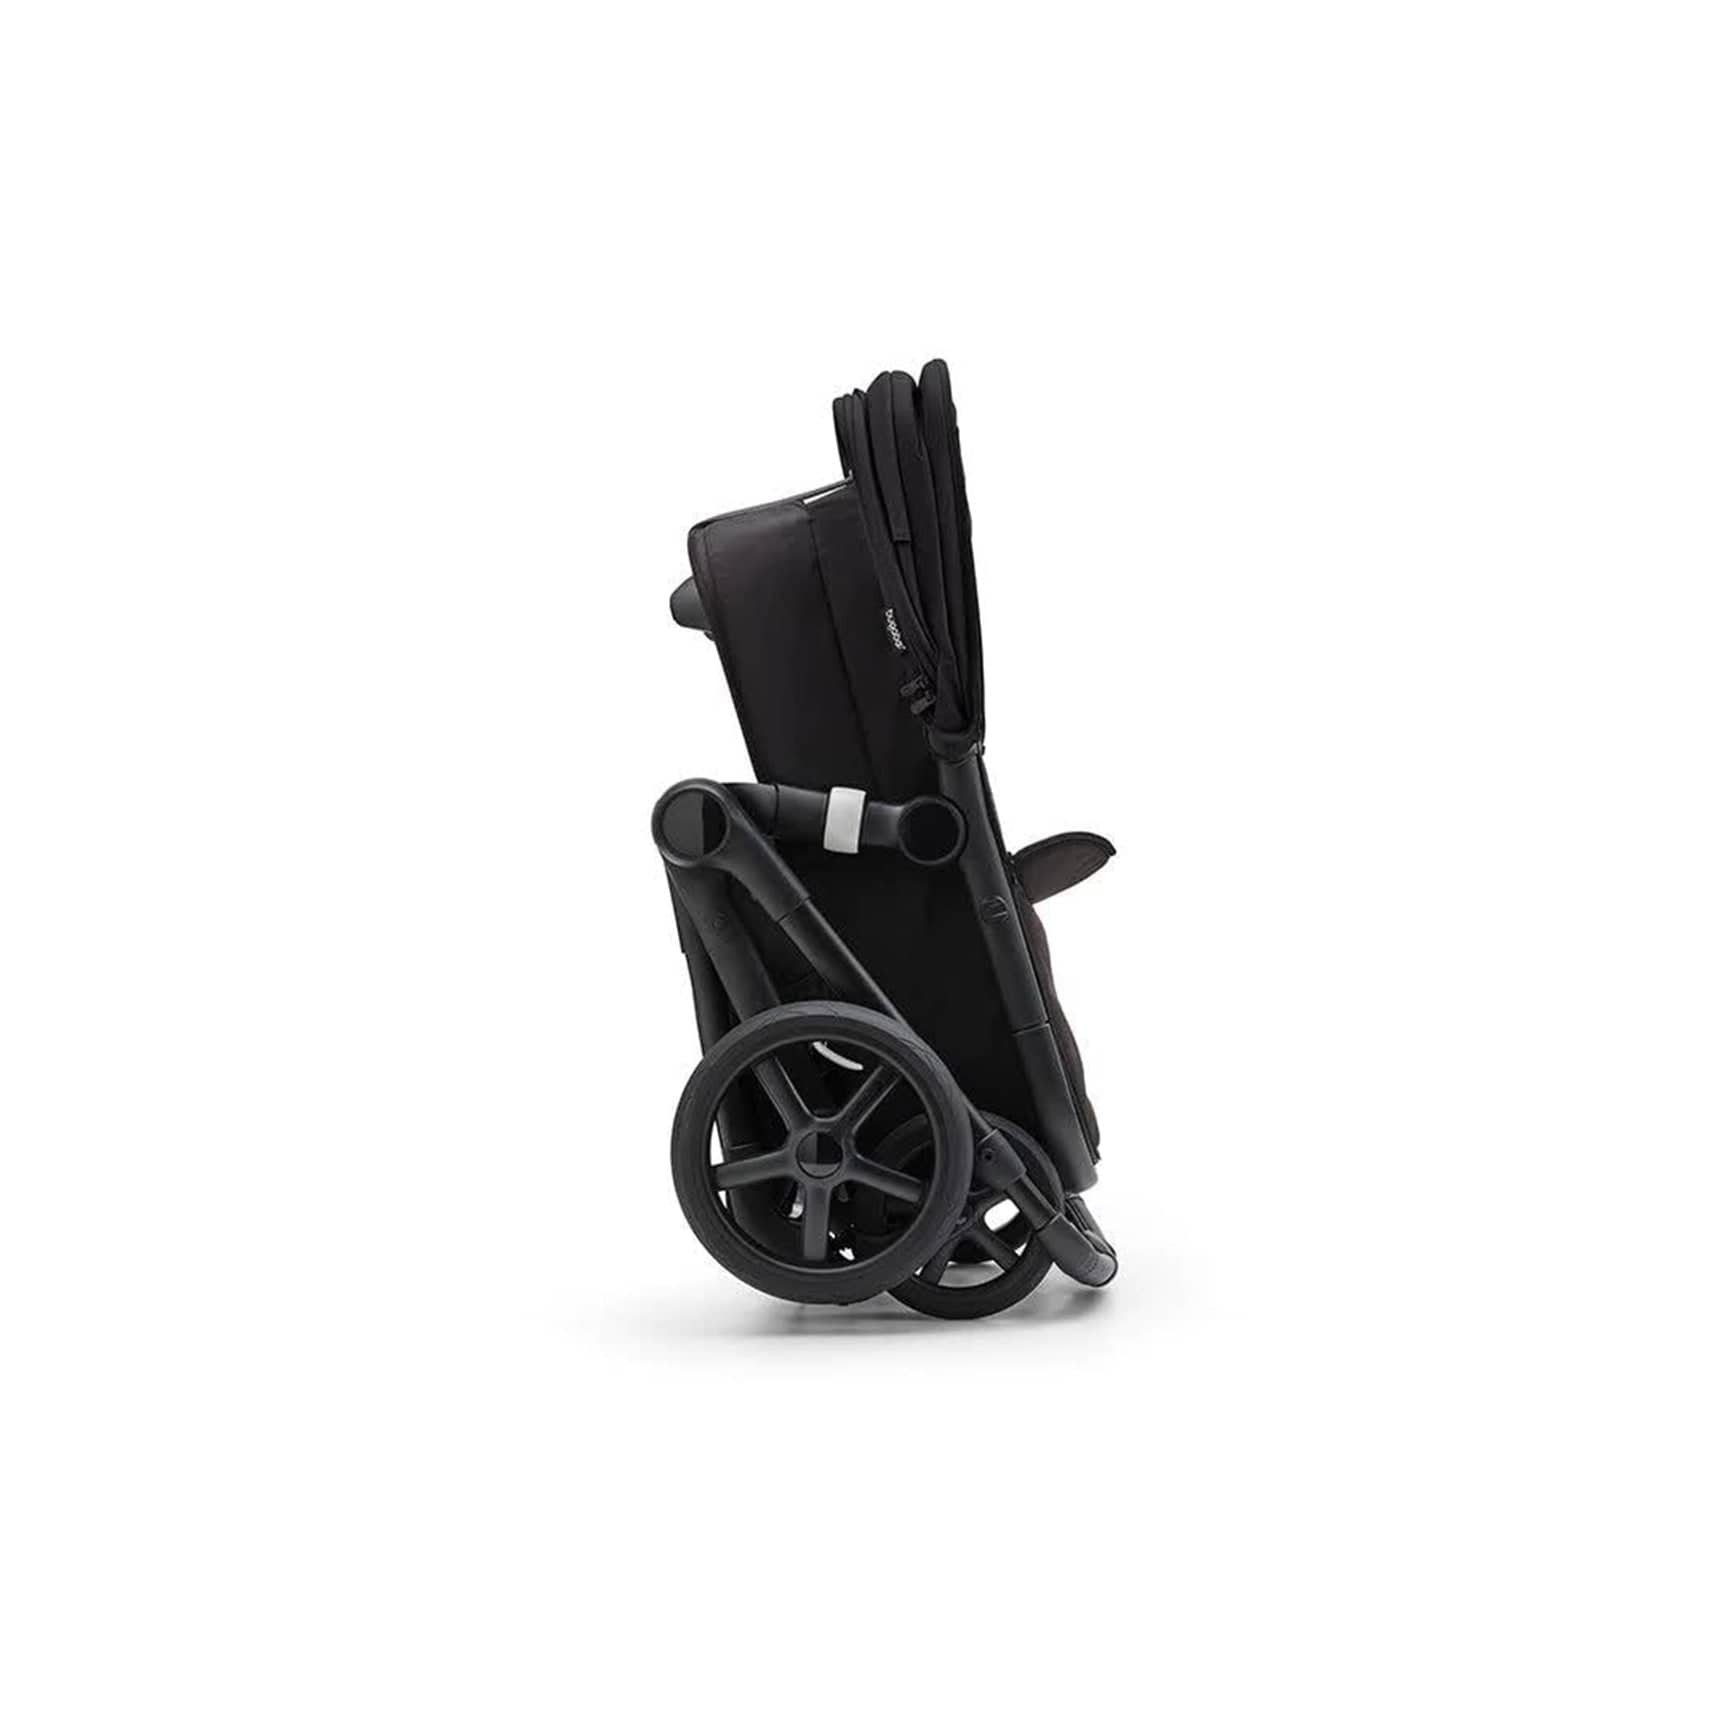 Bugaboo Fox 5 Ultimate Newborn Bundle - Forest Green Travel Systems 15179-BLK-FOR-GRN 8717447252788